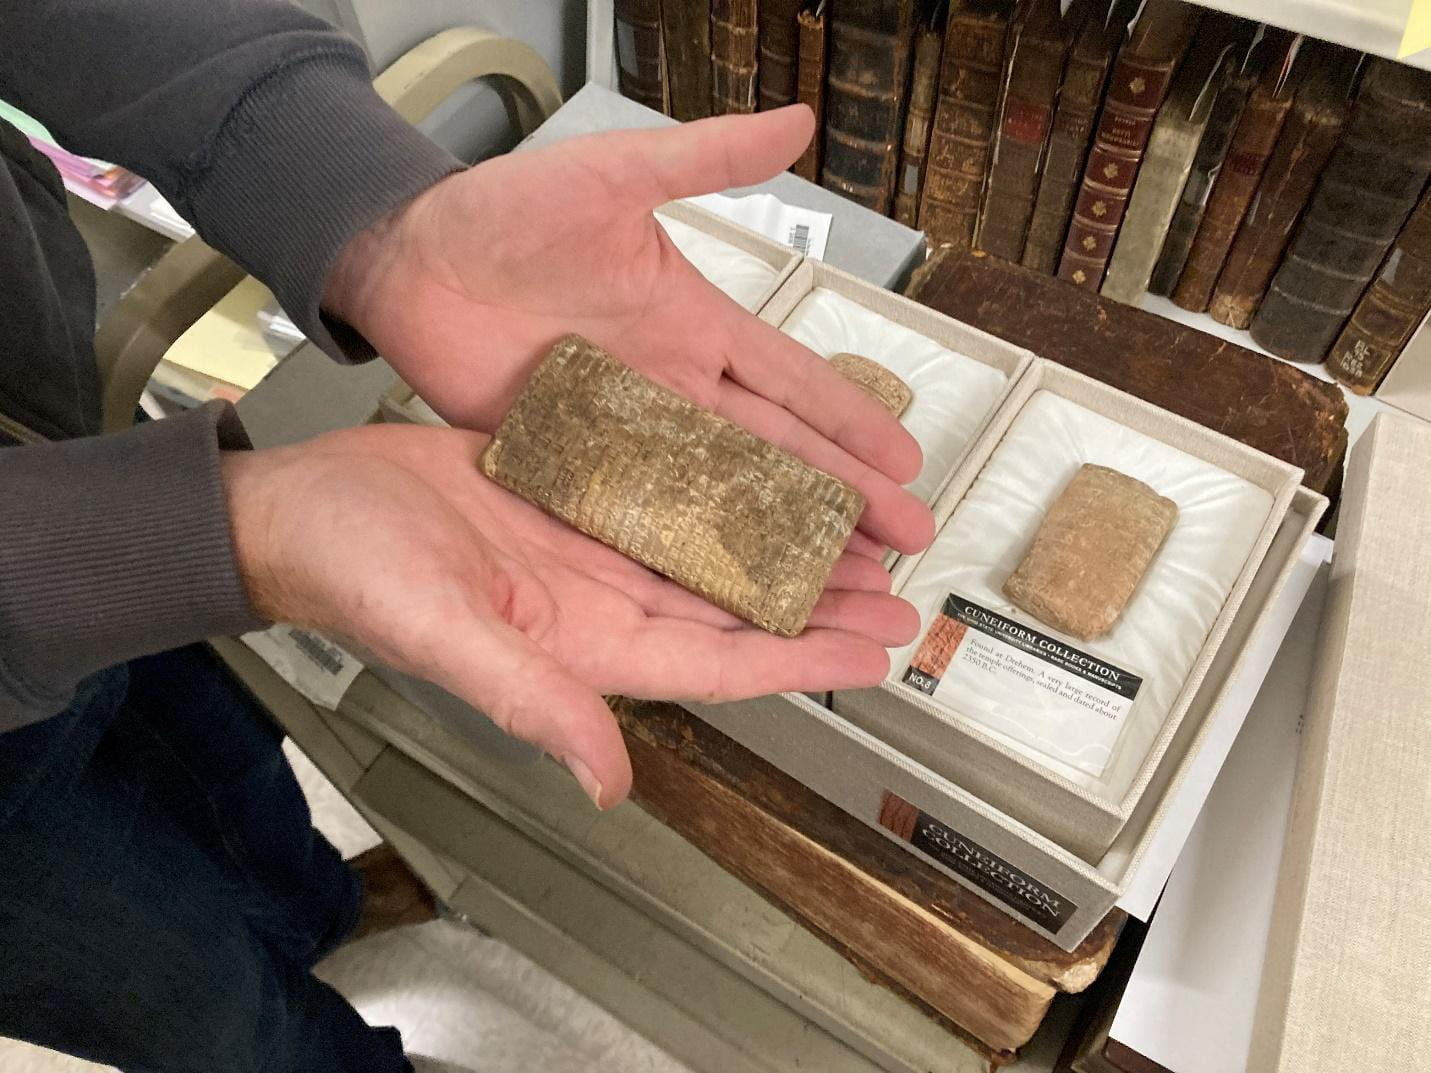 Eric Johnson, professor and curator of Thompson Special Collections, holds an ancient Babylonian clay tablet. Credit: Josh Farley